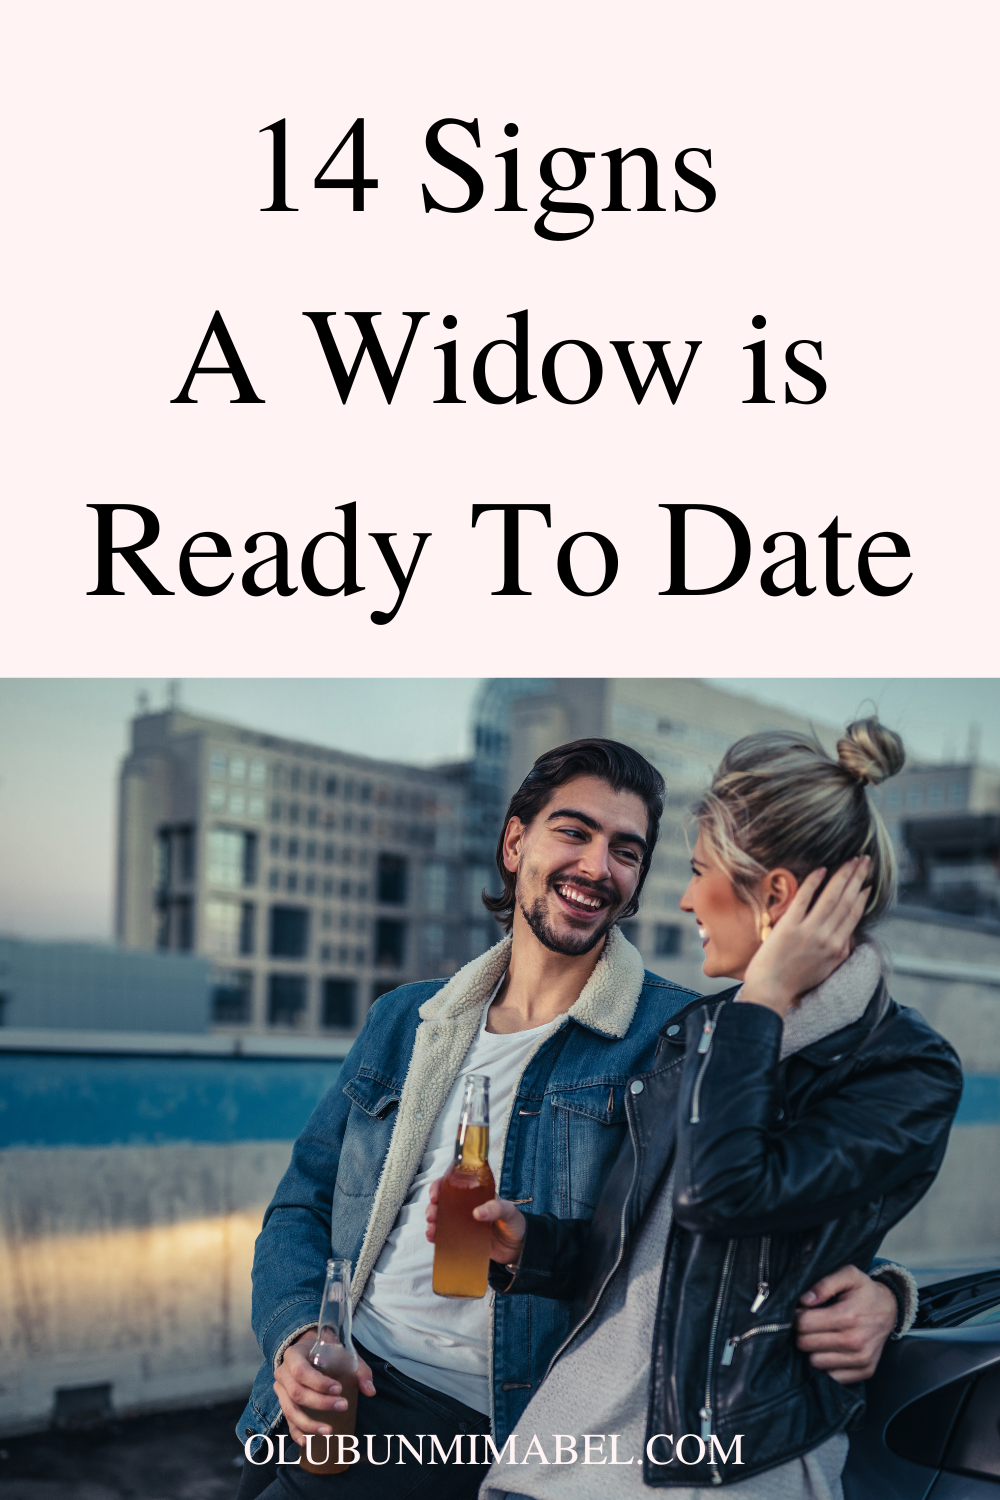 Signs a Widow is Ready To Date